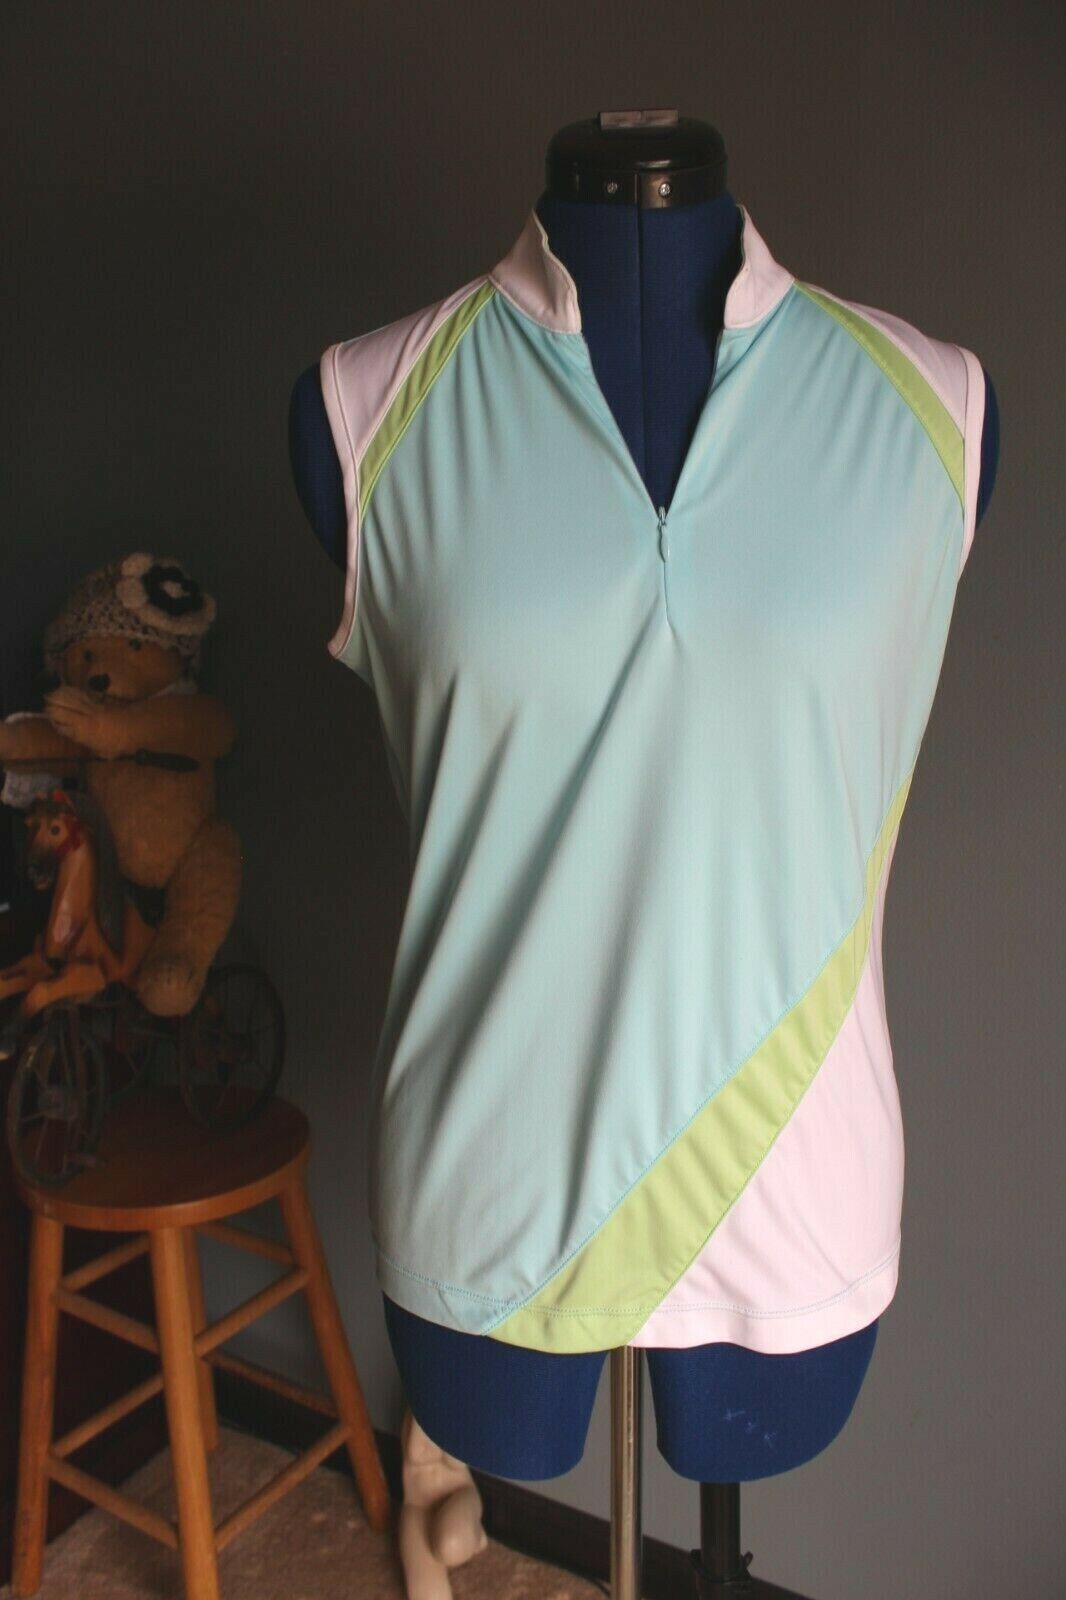 Primary image for Women's Greg Norman Play Dry Blue/White/Green Sleeveless Golf Shirt ~S~ TL101567